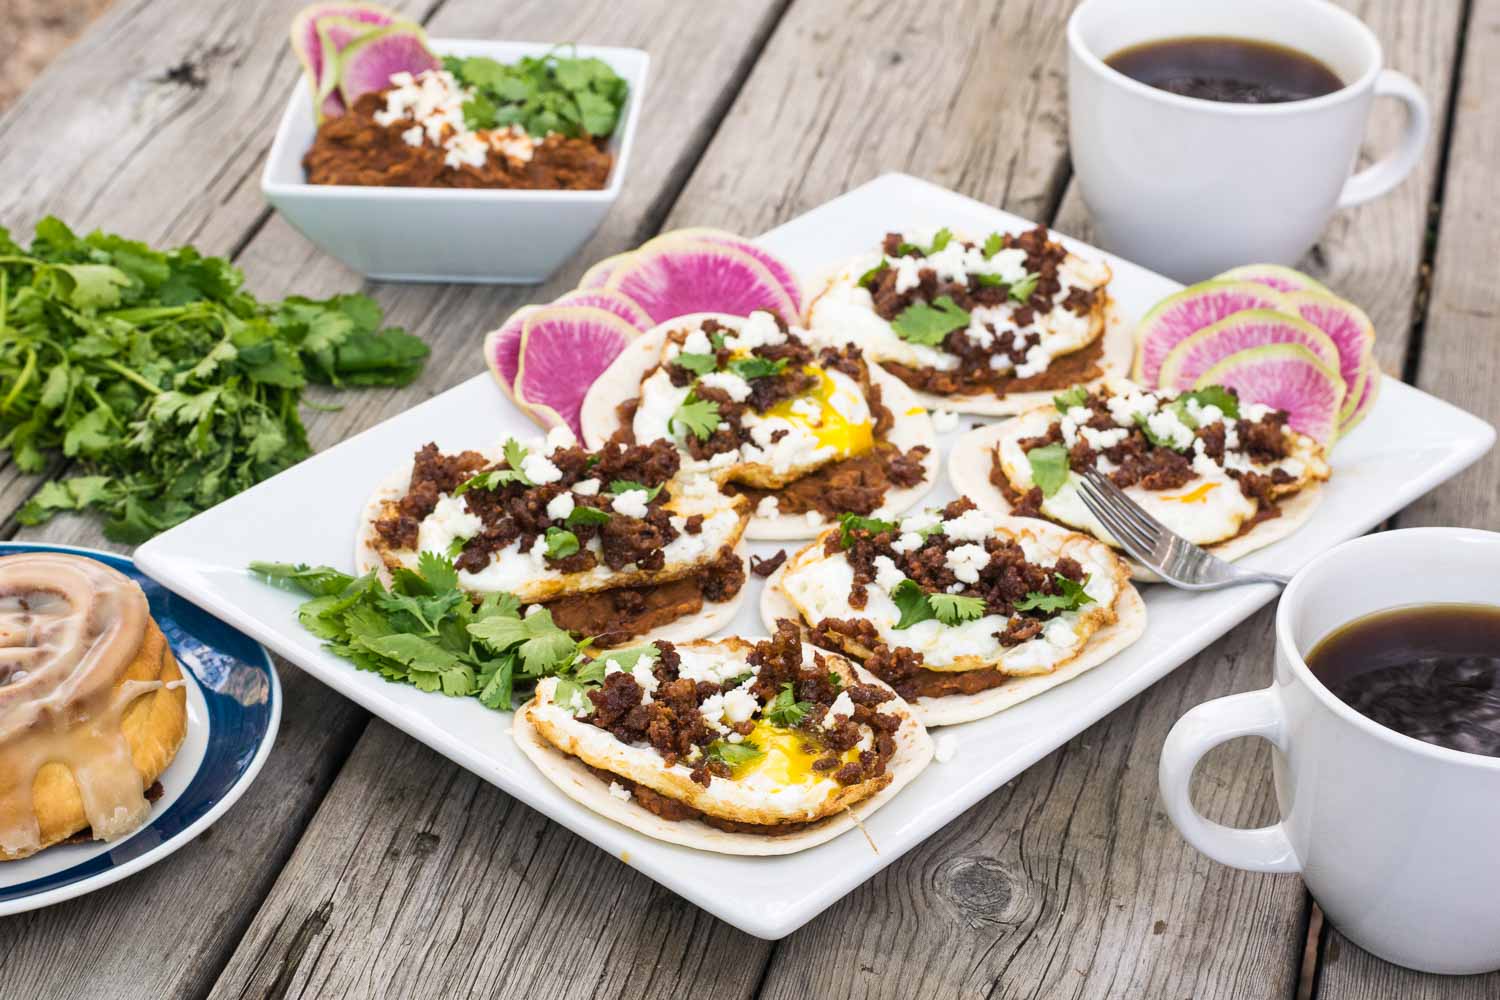 Spicy chorizo + smoky adobo refried beans + gooey fried eggs are perfectly paired for maximum morning happiness, whether it's weekend brunch or a weekday treat.